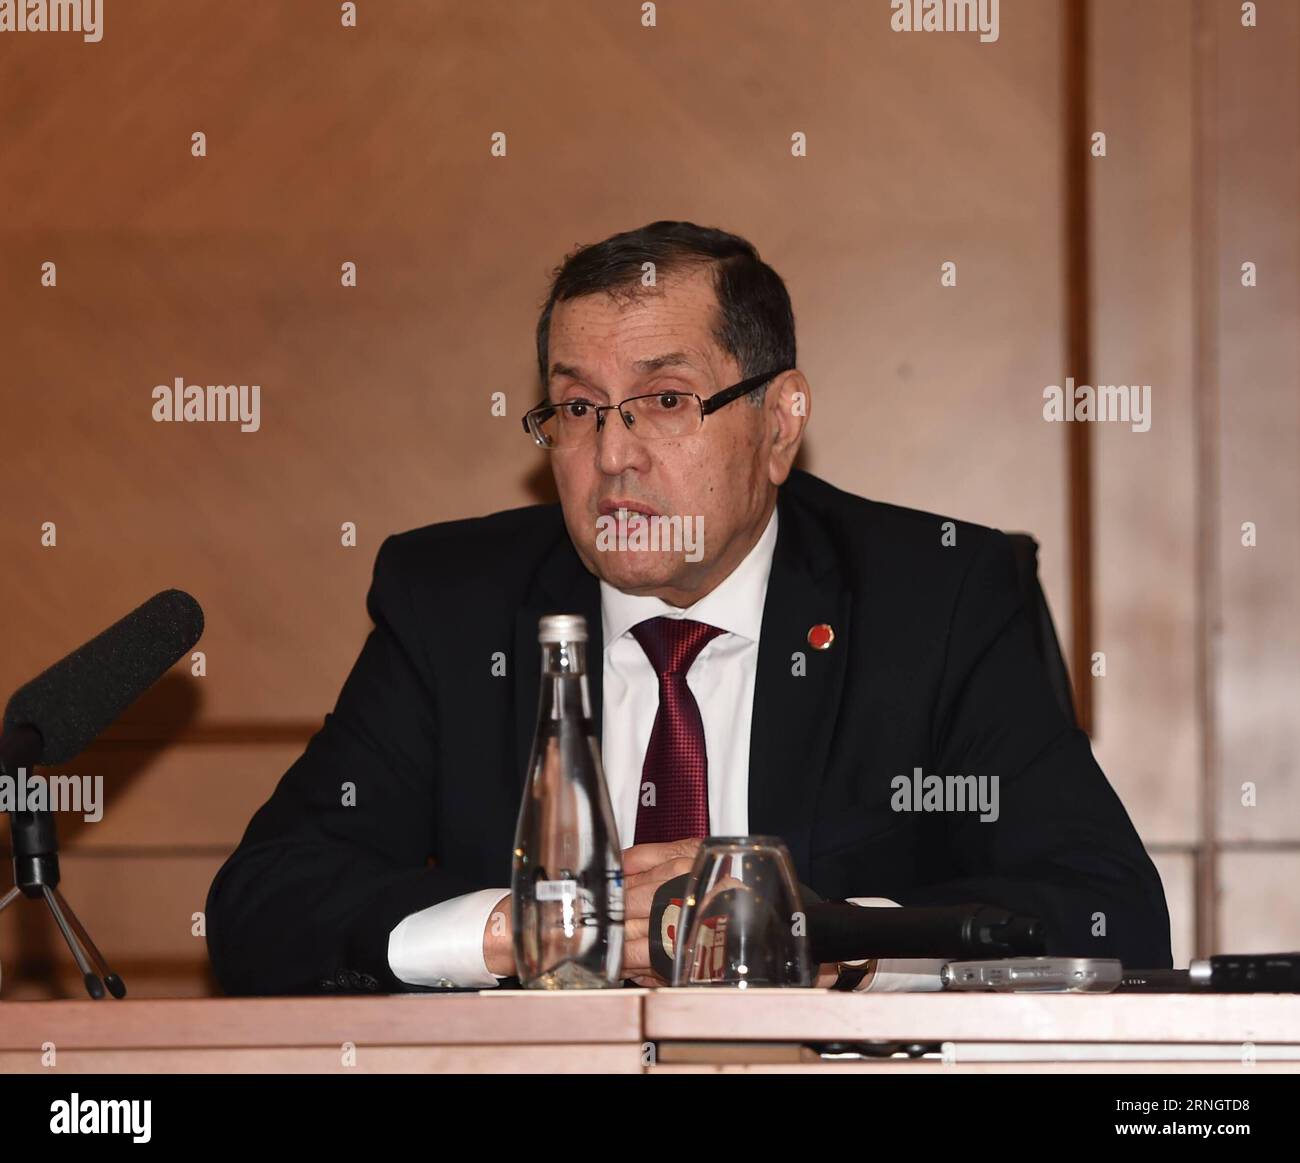 Energiekongress in Istanbul (161012) -- ISTANBUL, Oct. 12, 2016 -- Algerian Energy Minister Noureddine Bouterfa speaks at a press conference during the 23rd World Energy Congress in Istanbul, Turkey, on Oct. 12, 2016. The Organization of the Petroleum Exporting Countries (OPEC), in efforts to finalize an output-cut deal, decided on Wednesday to host a high-level technical experts meeting in Vienna on Oct. 28-29 with Russia and other non-cartel members.) TURKEY-ISTANBUL-WORLD ENERGY CONGRESS-OPEC HexCanling PUBLICATIONxNOTxINxCHN   Energy Congress in Istanbul 161012 Istanbul OCT 12 2016 Algeria Stock Photo